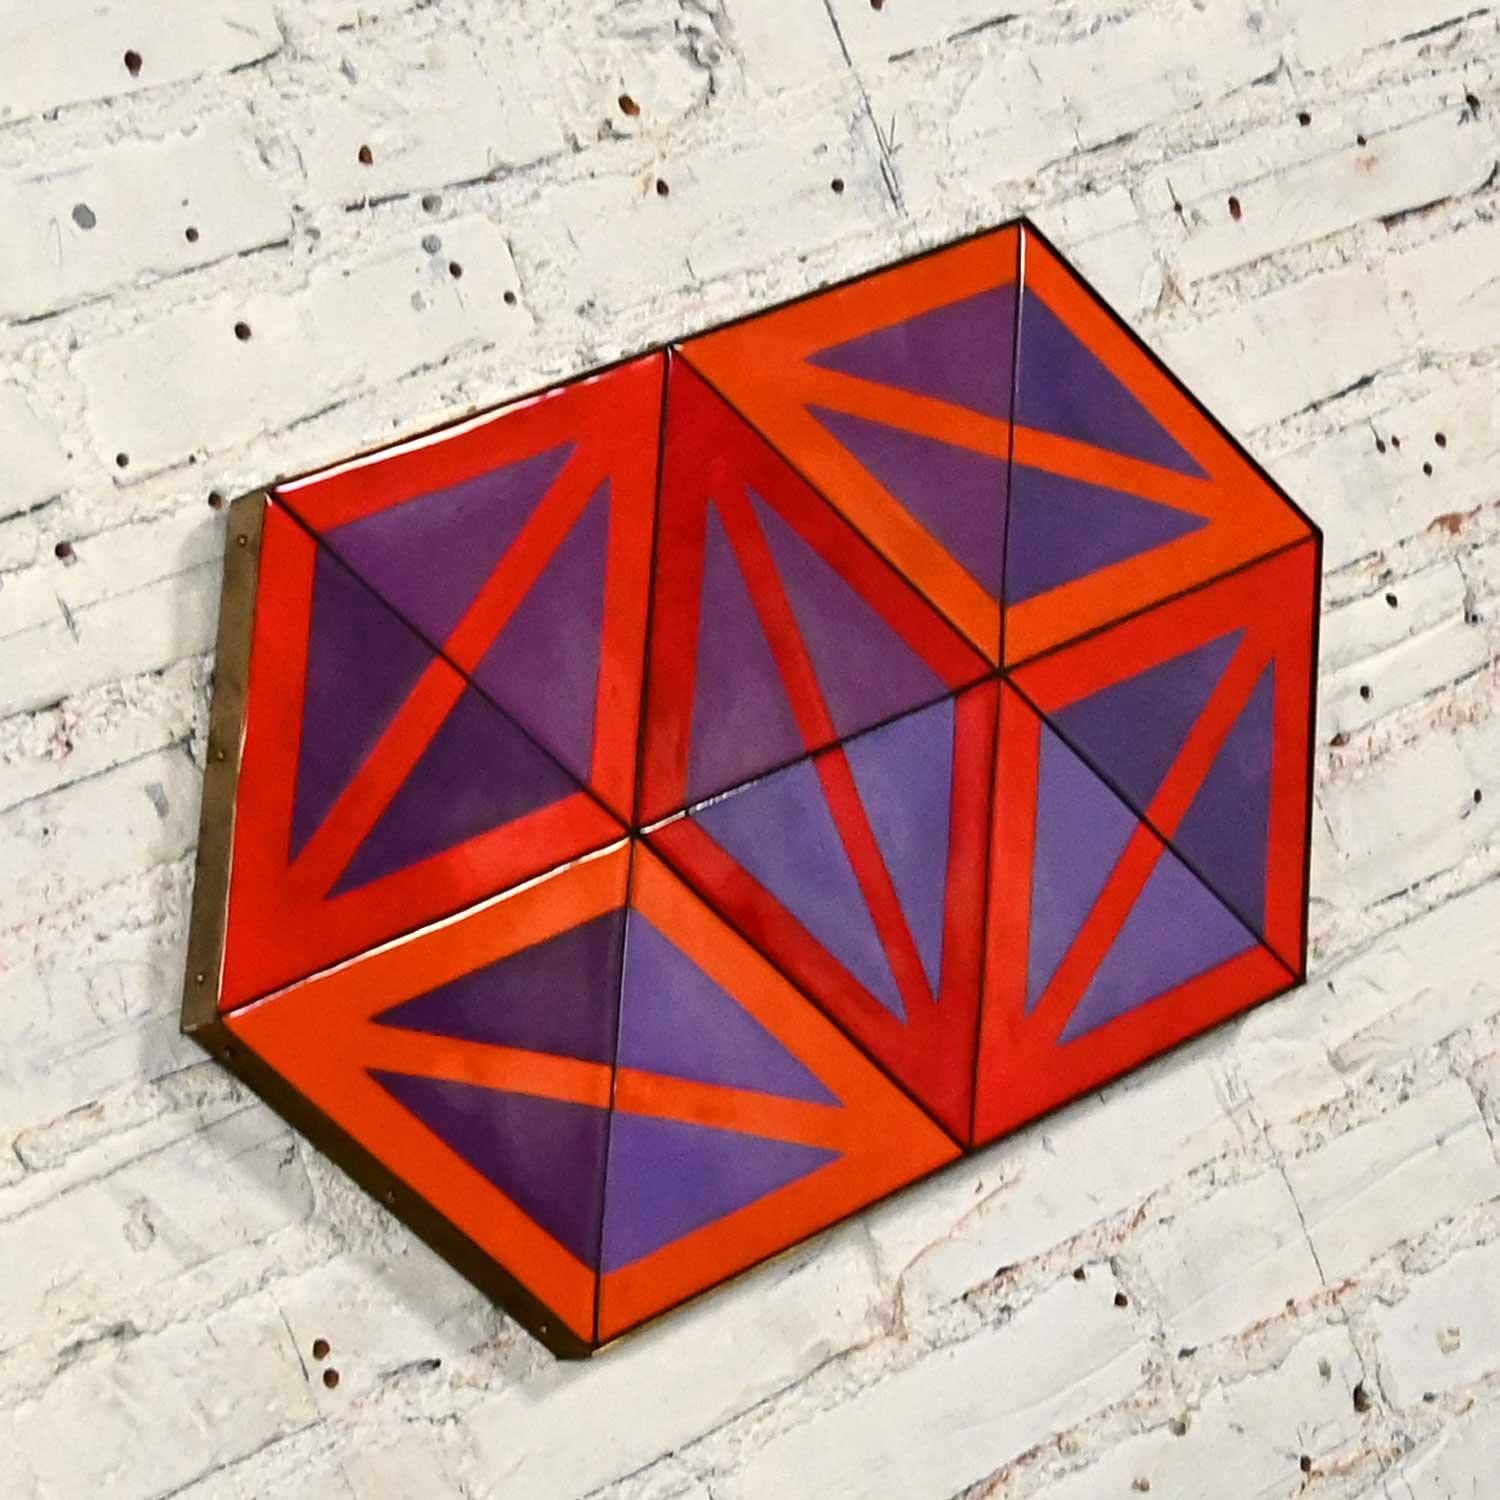 Phenomenal vintage Mid-Century Modern enamel on copper geometric wall sculpture signed by Ellamarie Wooley and numbered 534. Beautiful condition, keeping in mind that this is vintage and not new so will have signs of use and wear. Brass strap frame